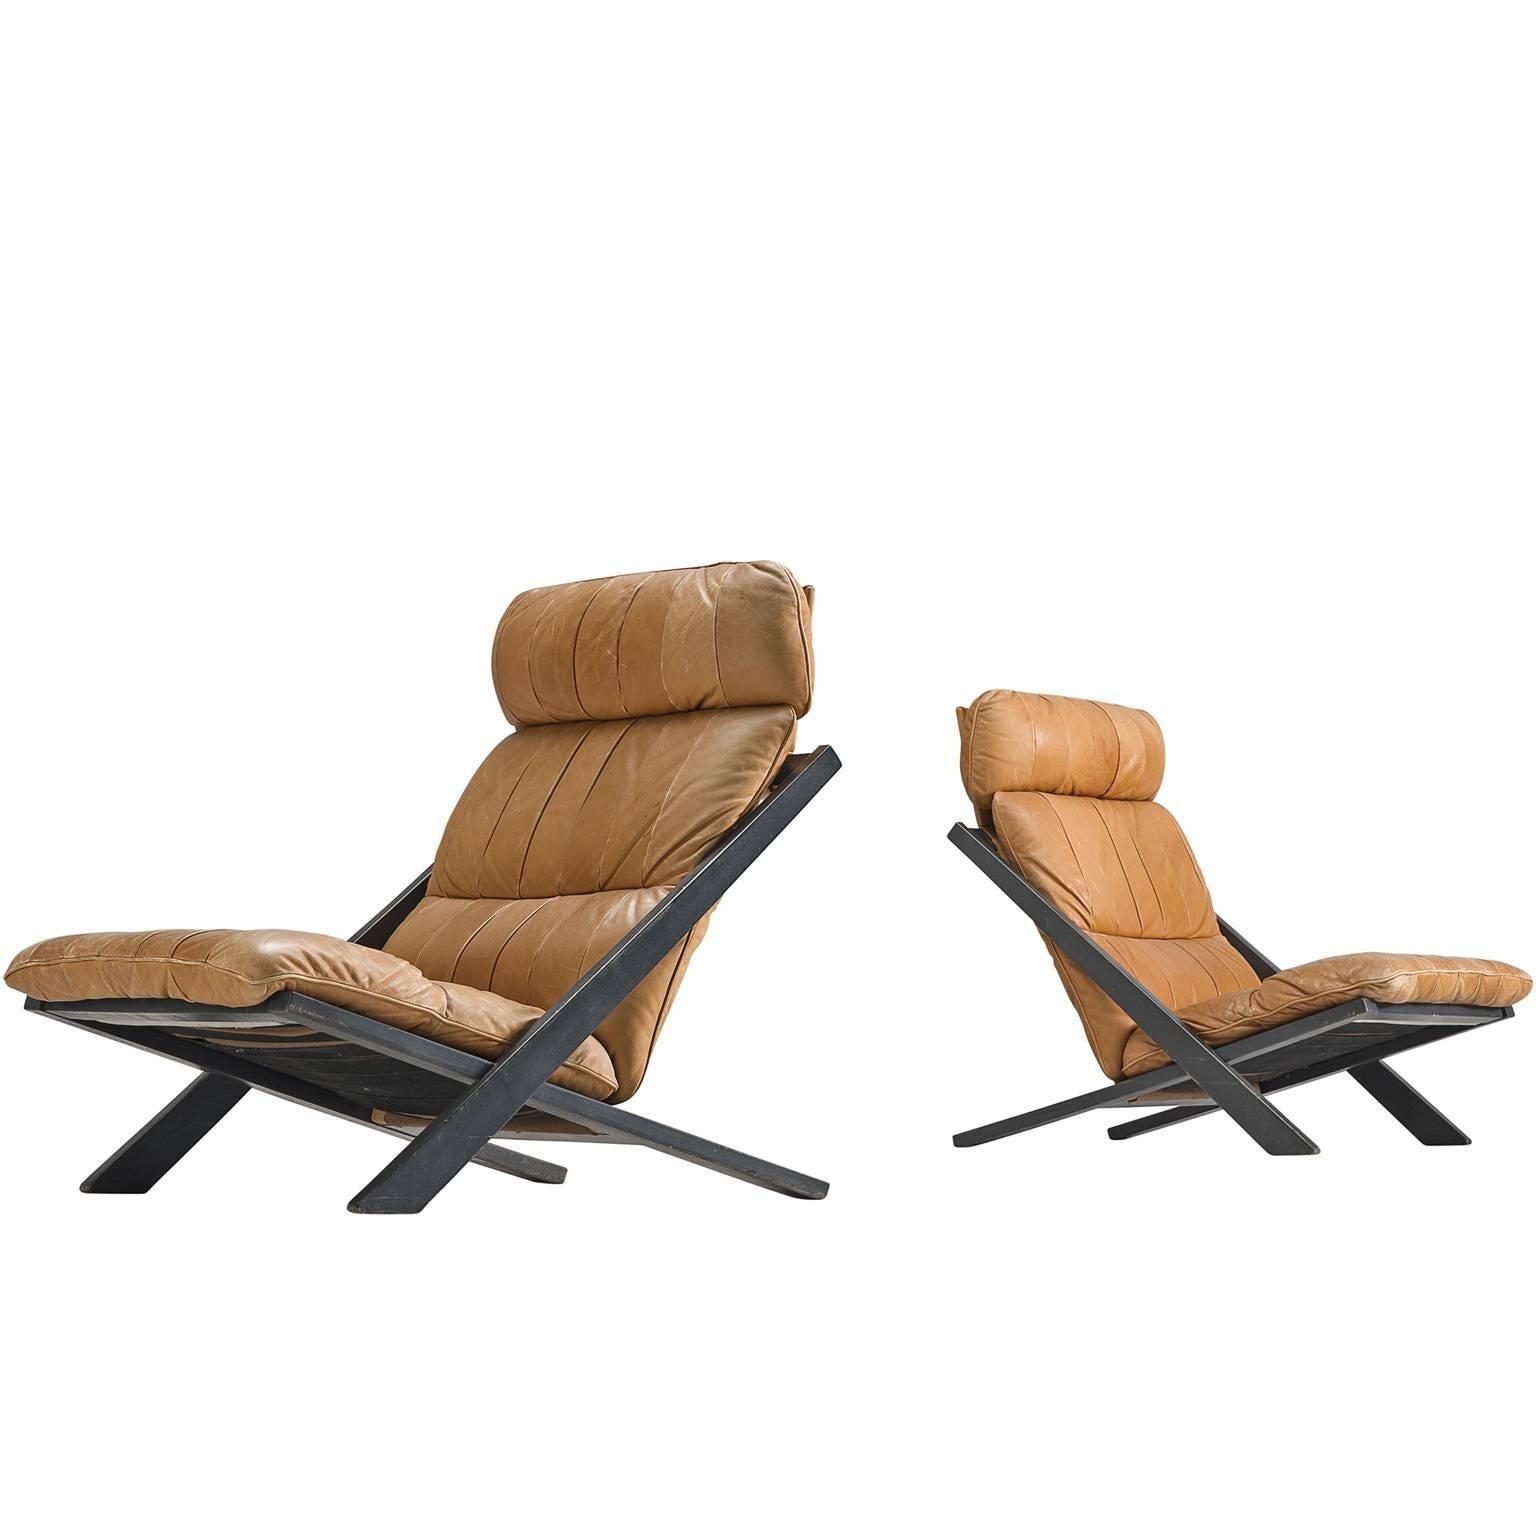 Pair of Cognac Leather Ueli Berger Lounge Chairs for De Sede